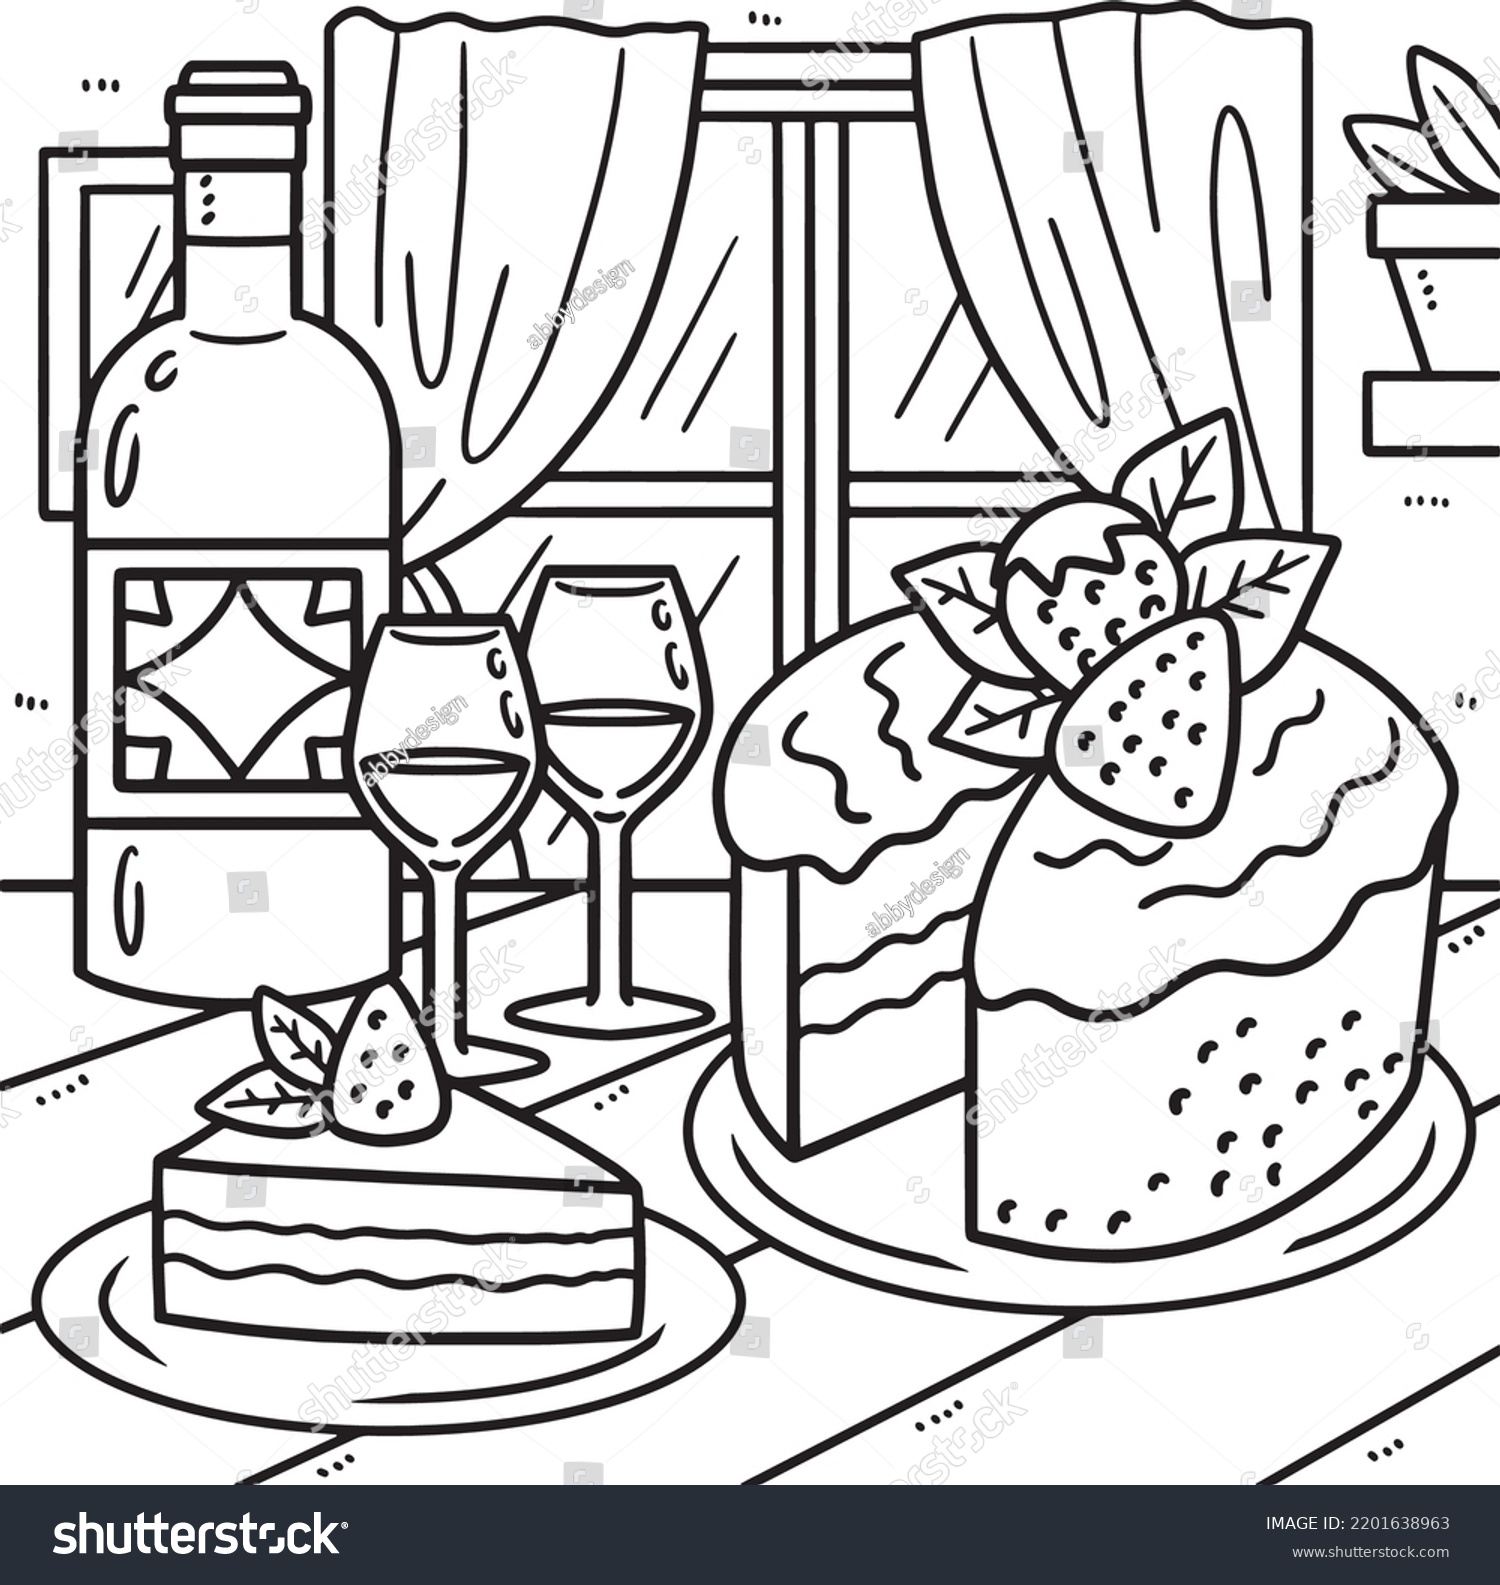 Wedding cake wine coloring page kids stock vector royalty free